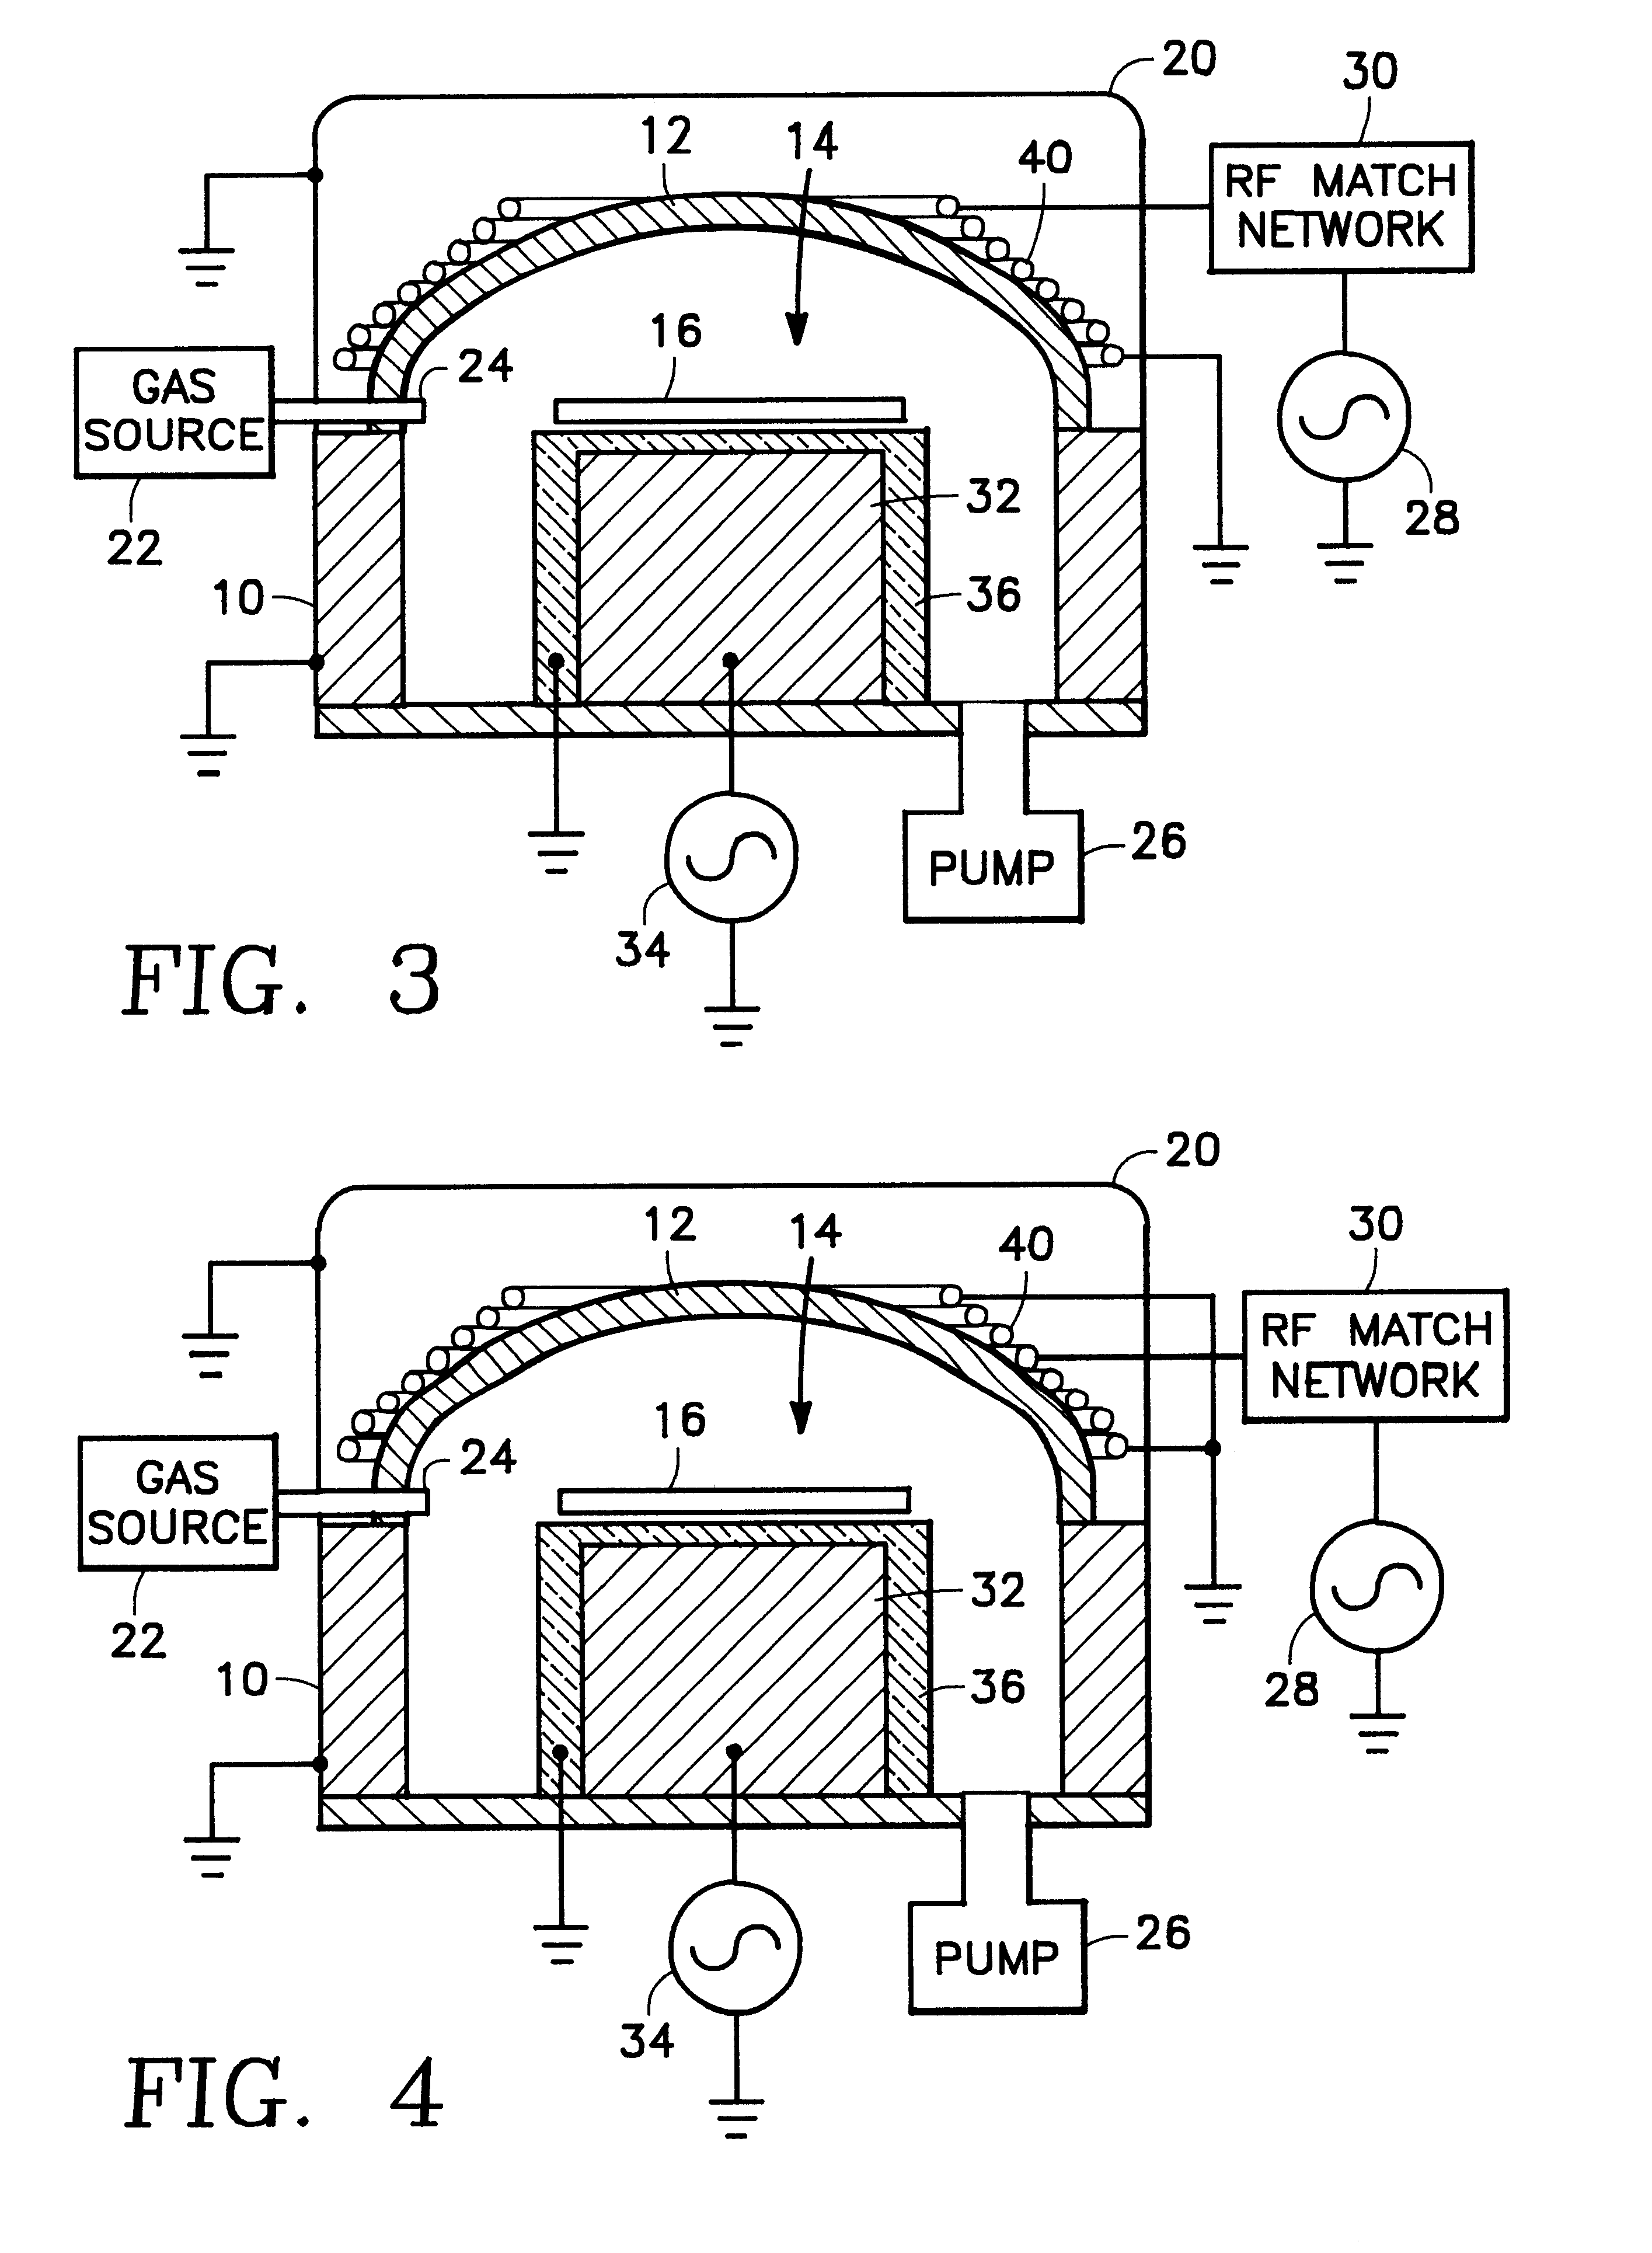 RF plasma reactor with hybrid conductor and multi-radius dome ceiling